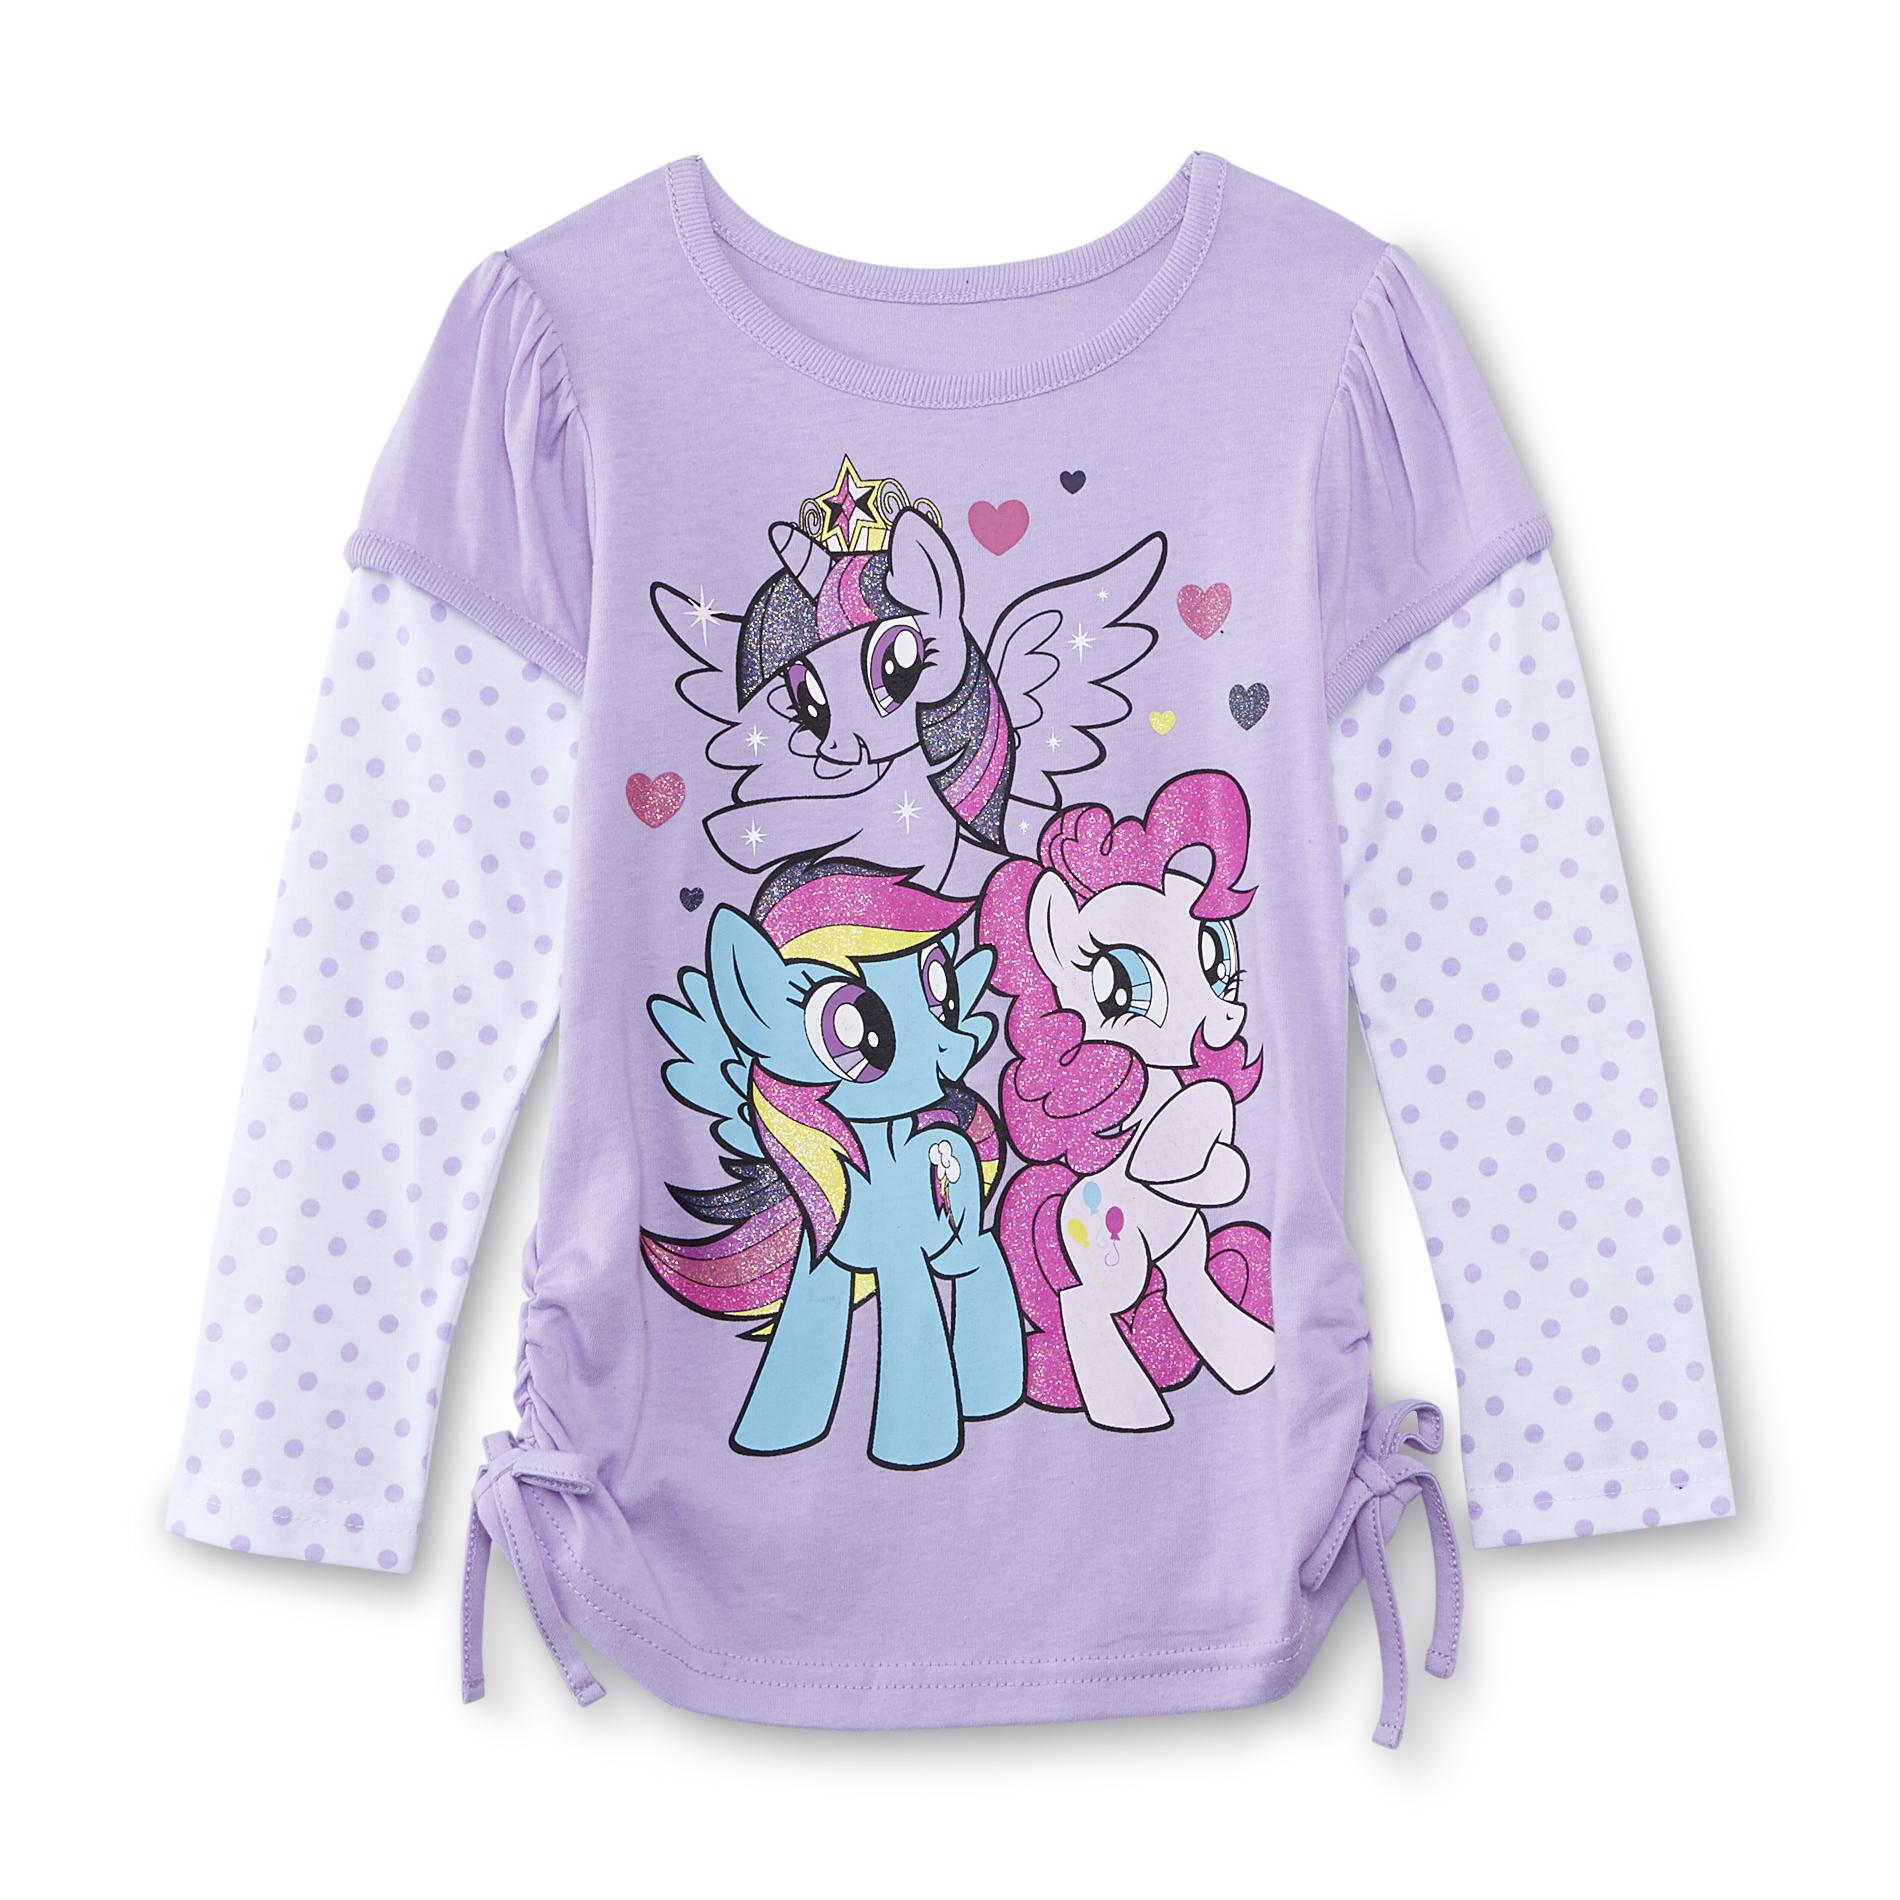 Toddler Girl's Graphic T-Shirt